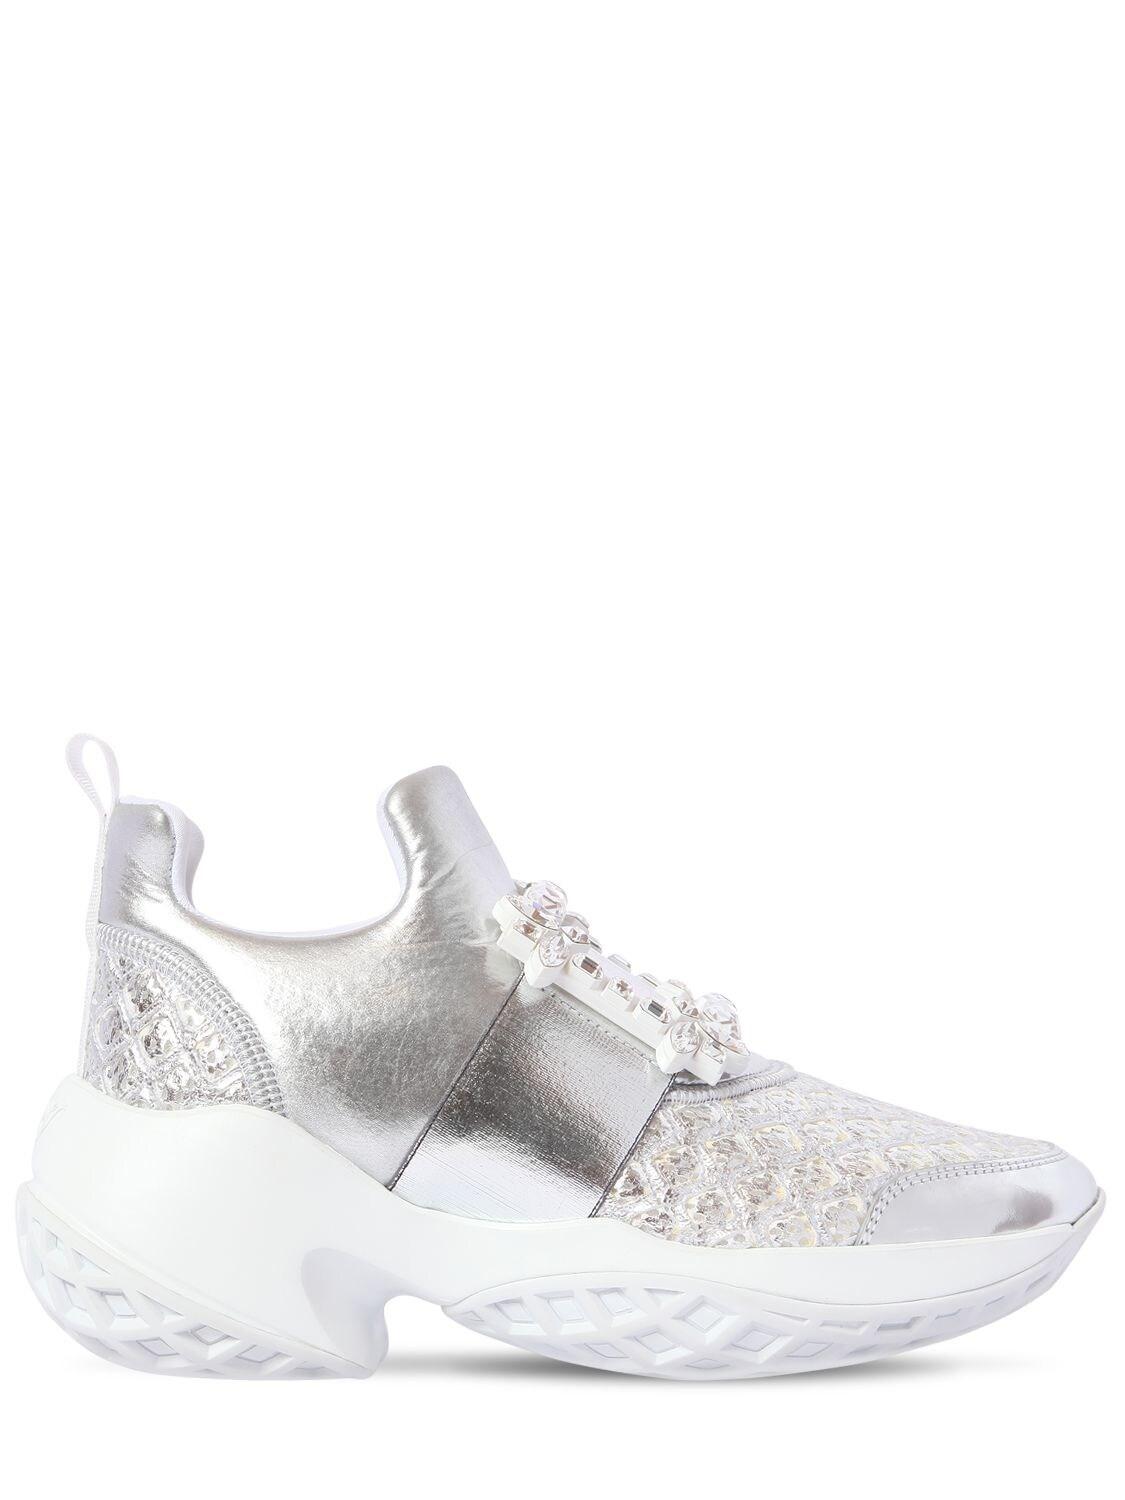 Roger Vivier Leather Viv' Run Strass Buckle Sneakers in Silver 